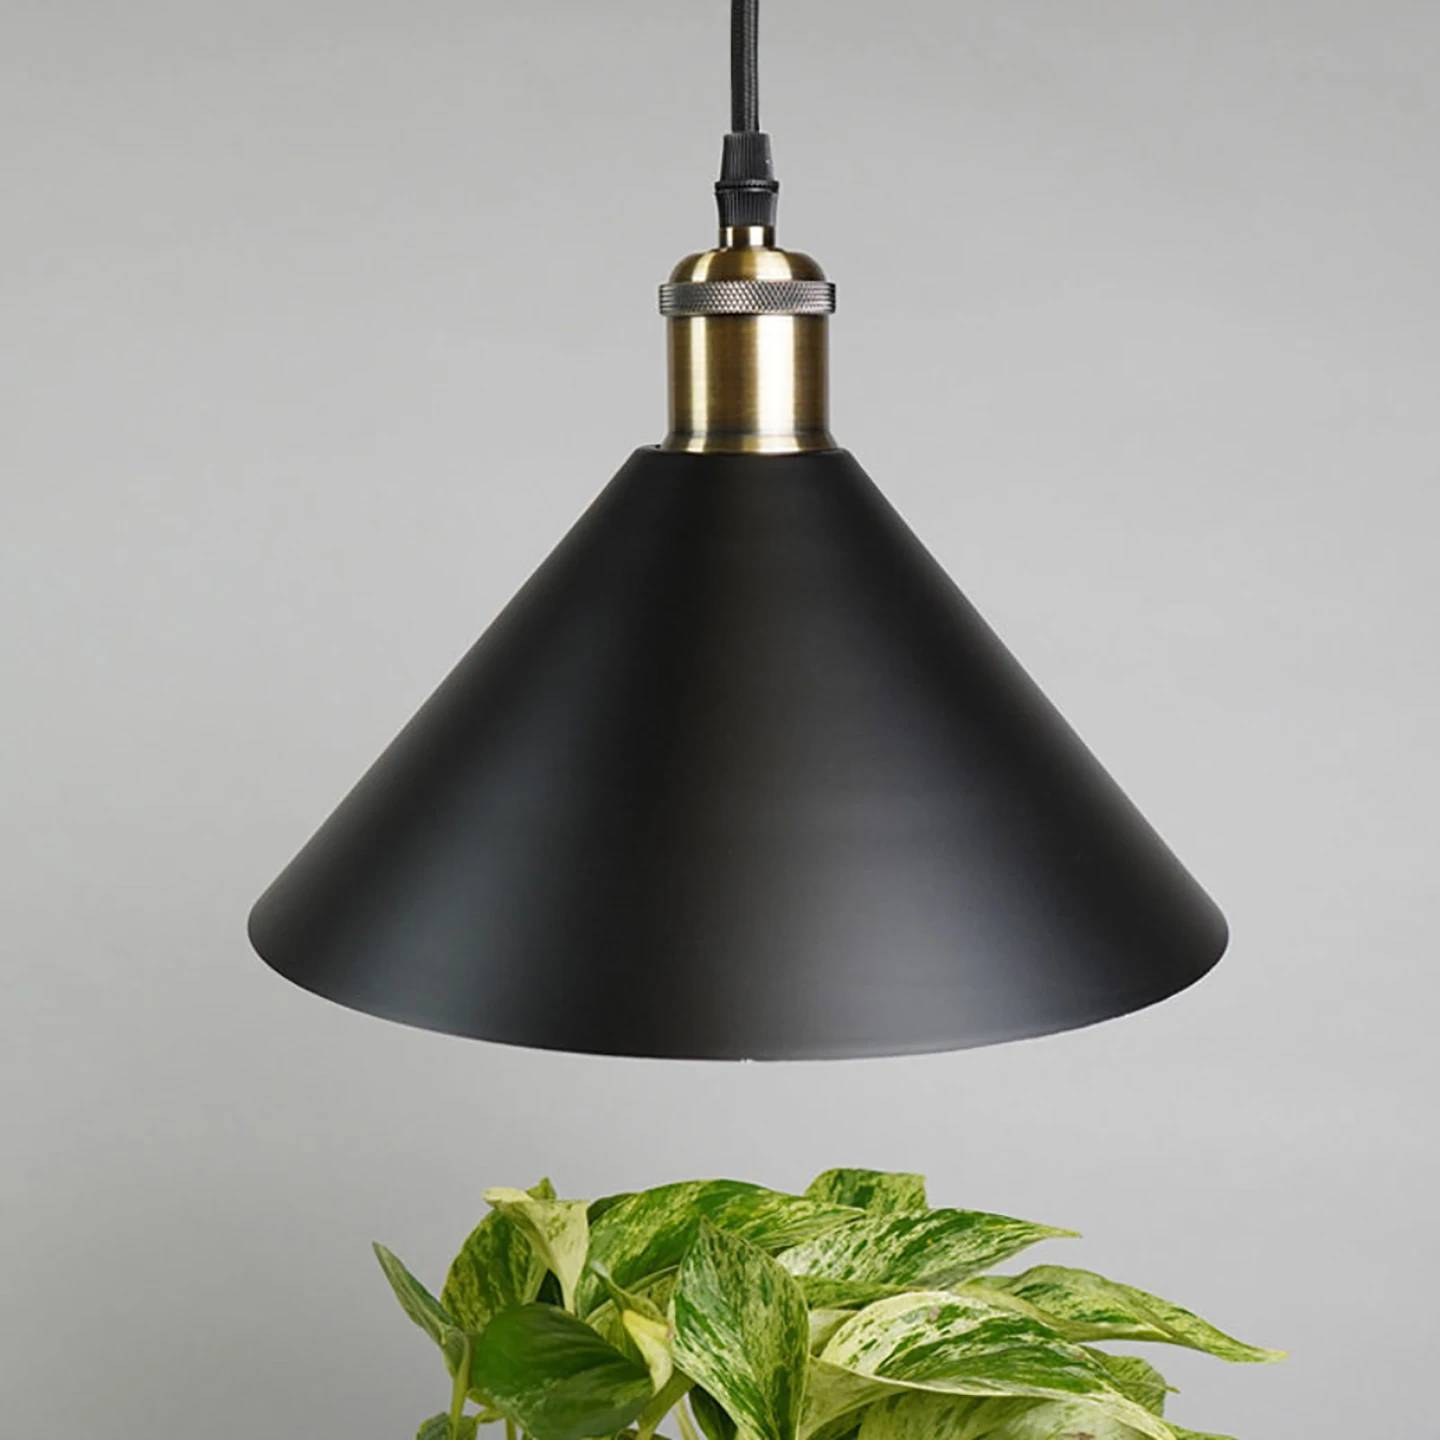 This image provided by Soltech shows a Vita Grow Pendant houseplant grow light, which emits full-spectrum lighting that mimics natural sunlight.